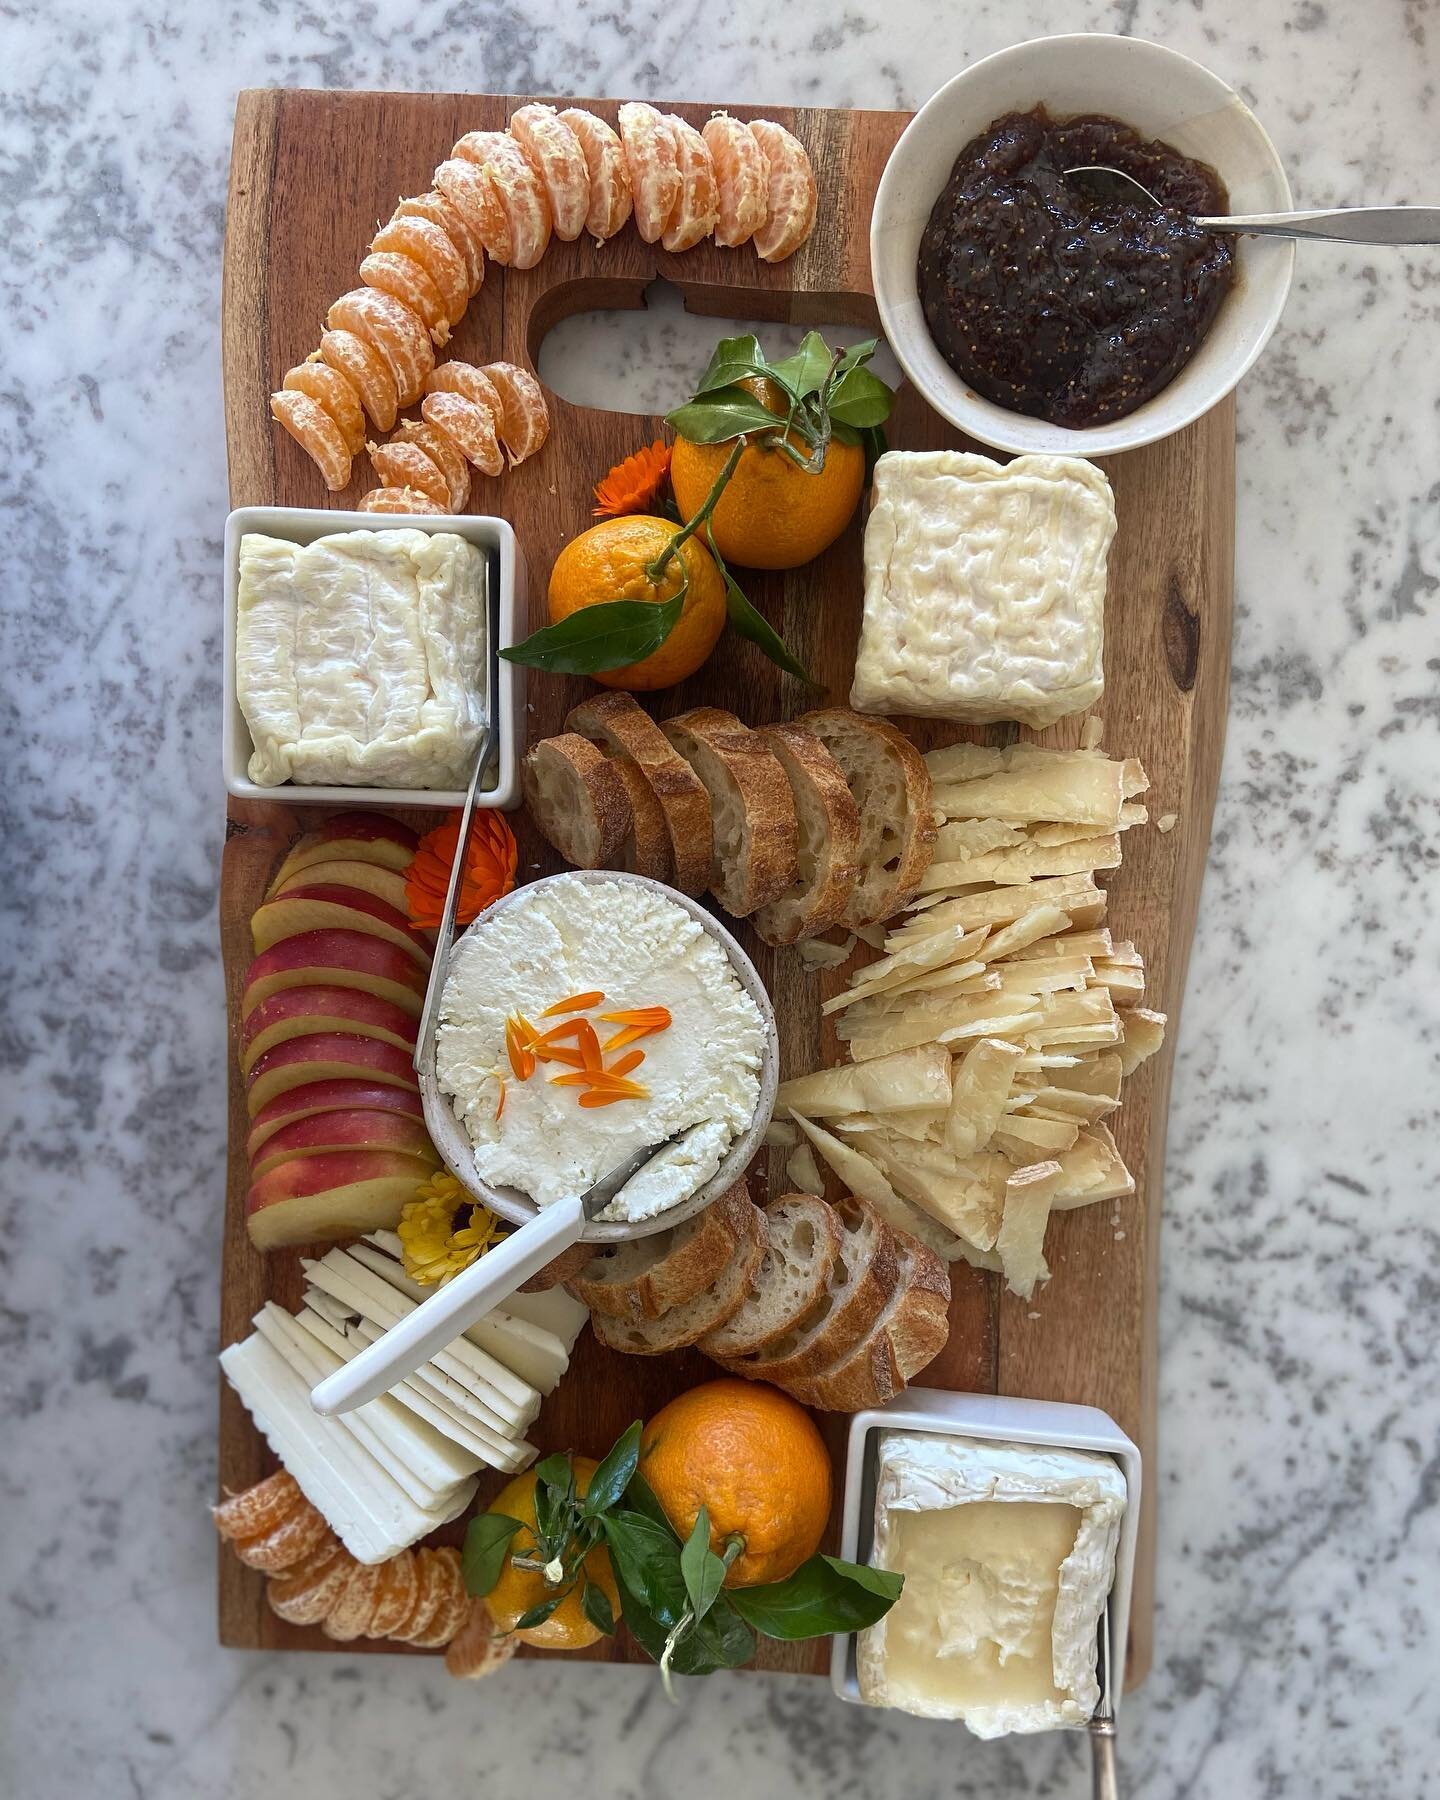 Fall cheeseboard for our wreath making class today! So fun! Baguette from @routeonebakeryandkitchen 

#cheeseboard #wreathmaking #artisancheese #cheese #tomales #tomalesfarmsteadcreamery #goatcheese #sheepcheese @tolumafarms